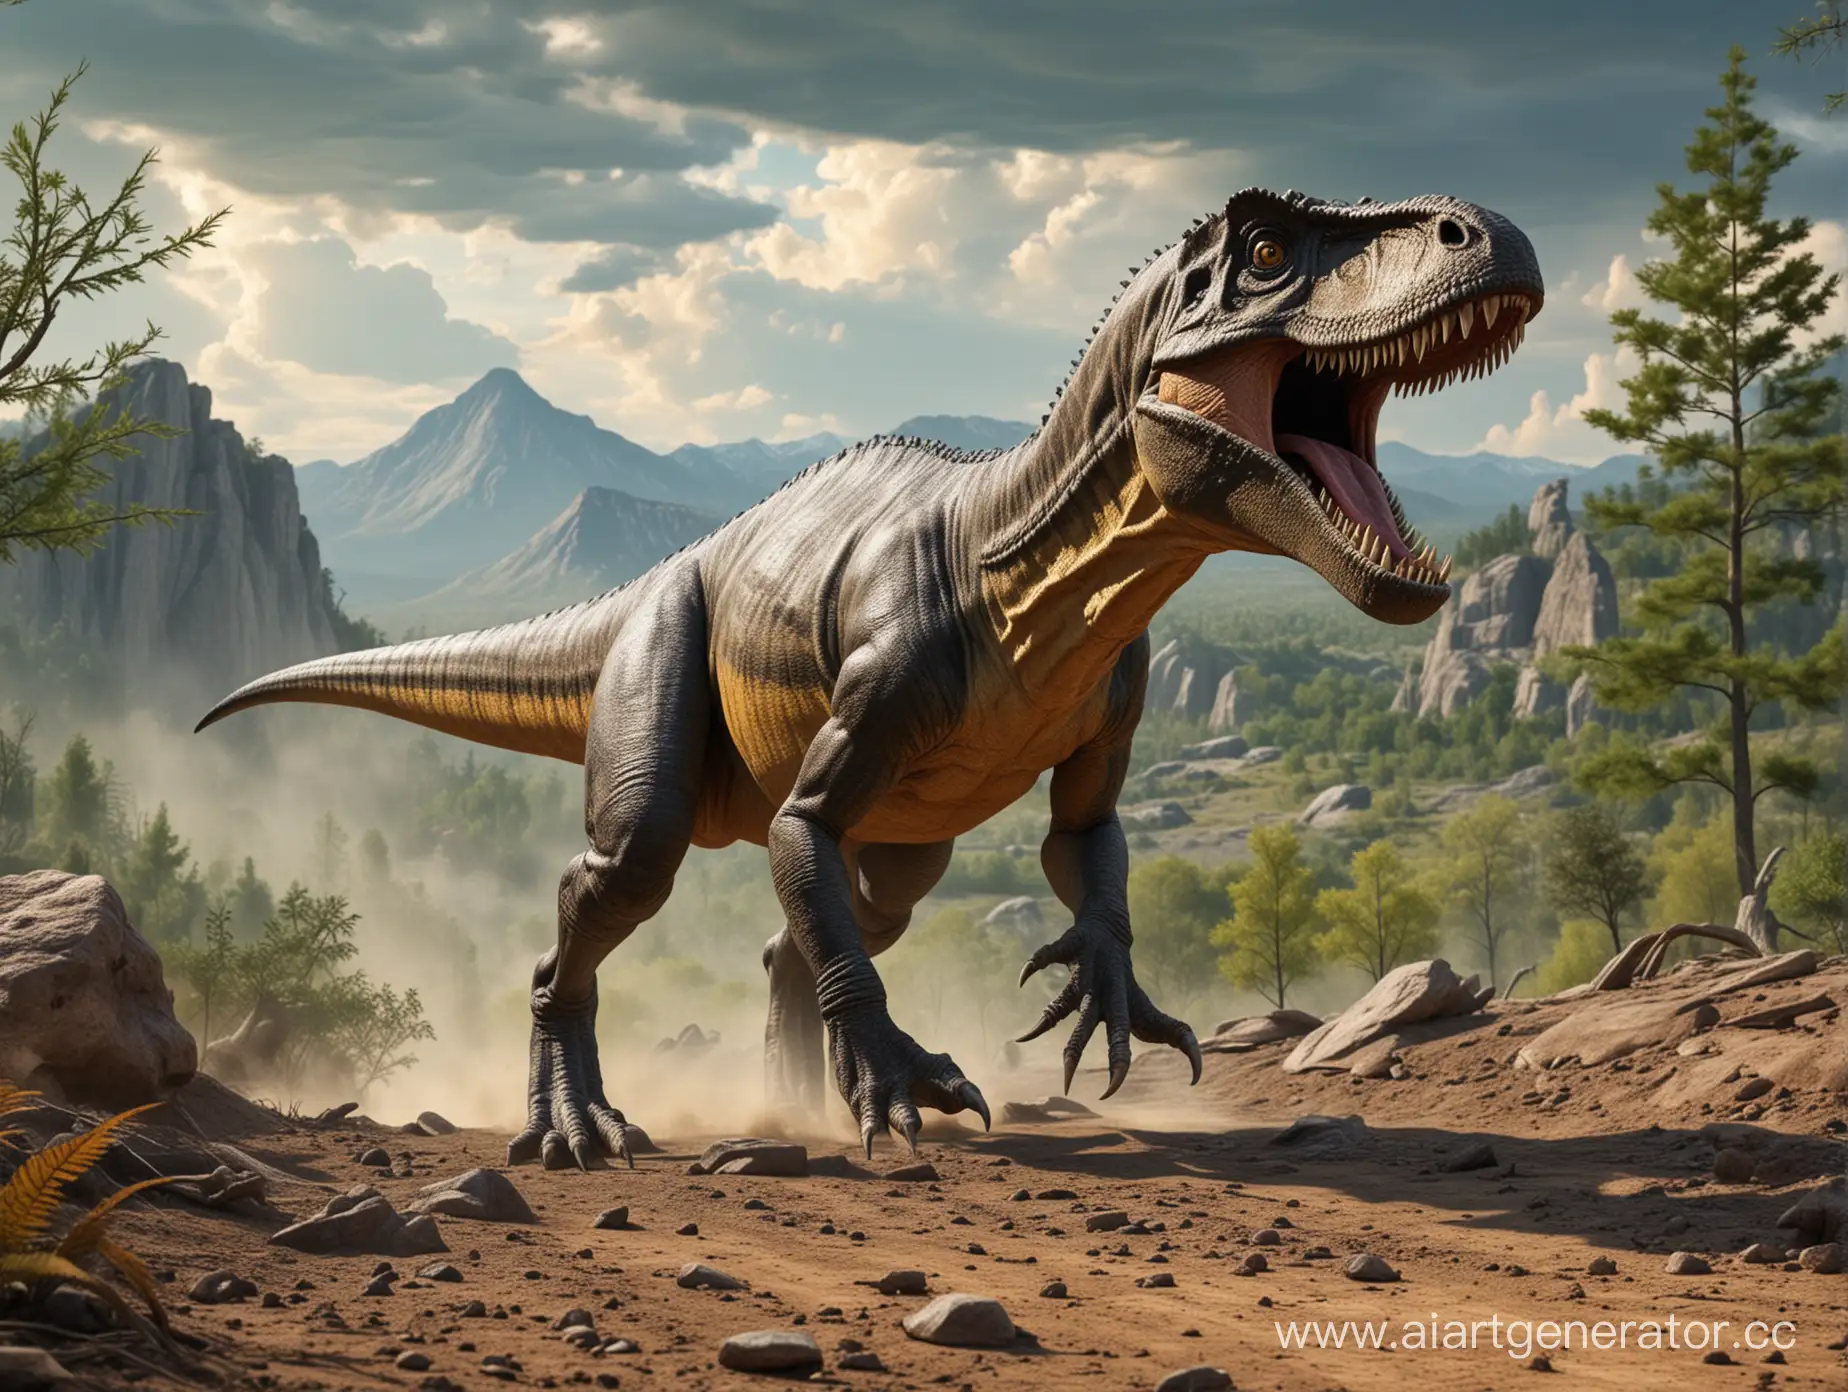 Allosaurus hunts a dinosaur against the background of nature